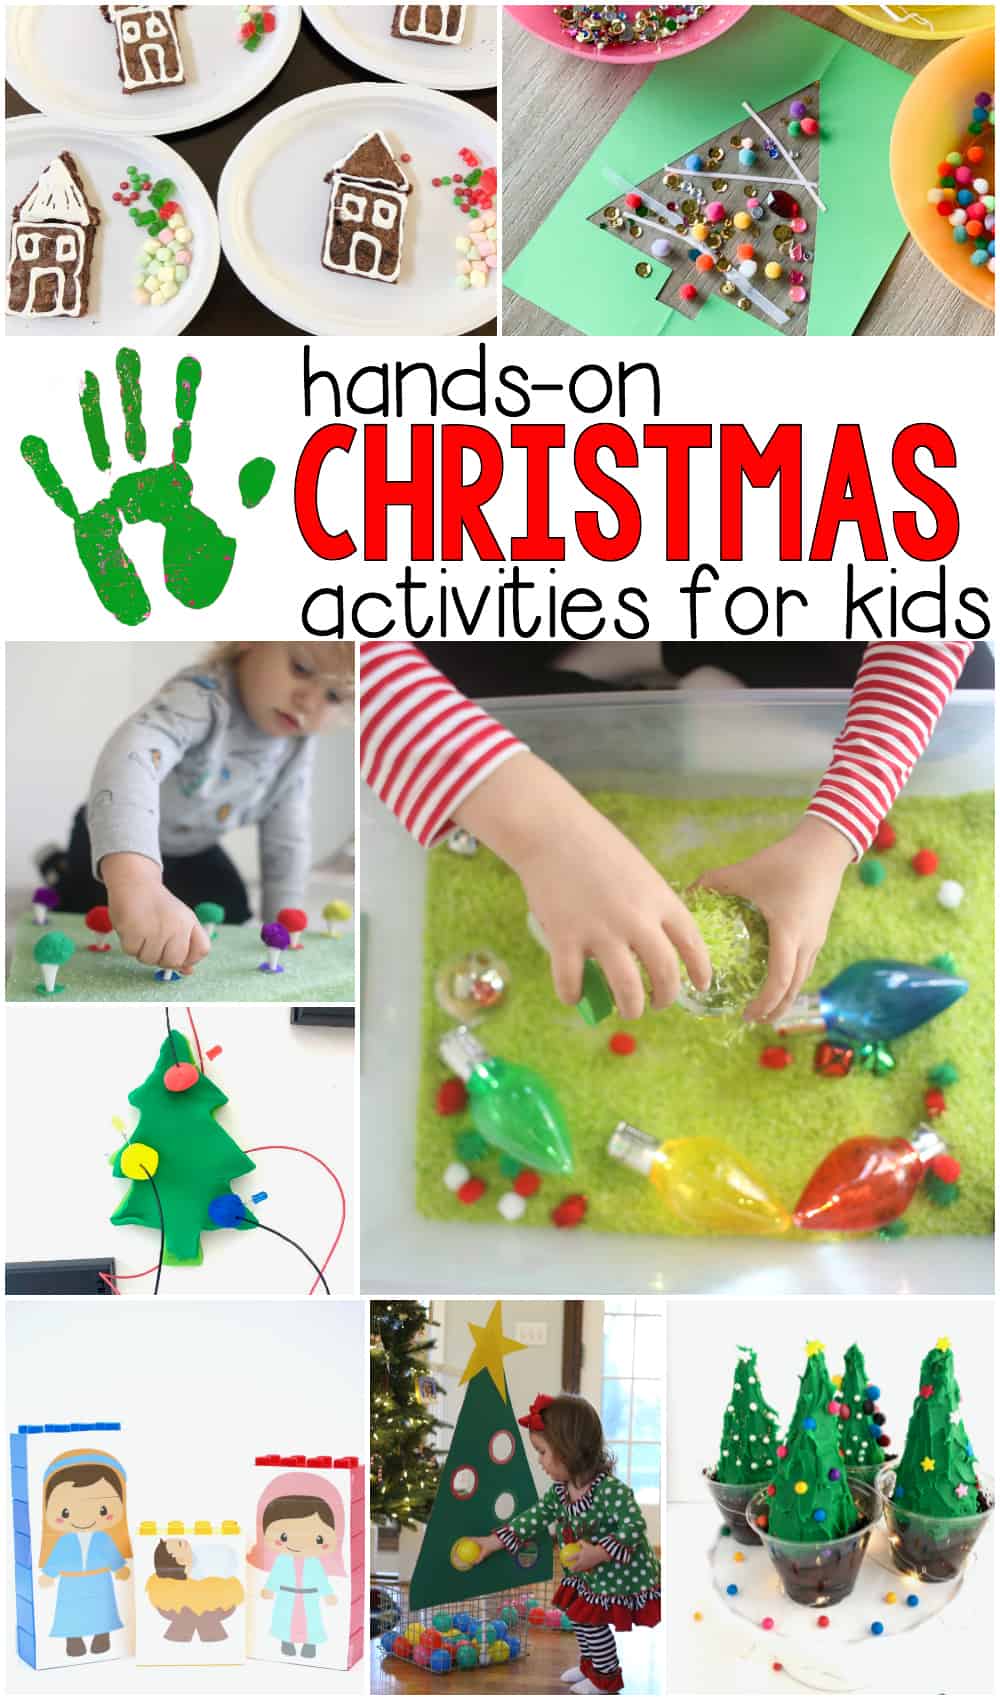 HandsOn Christmas Activities for Kids I Can Teach My Child!